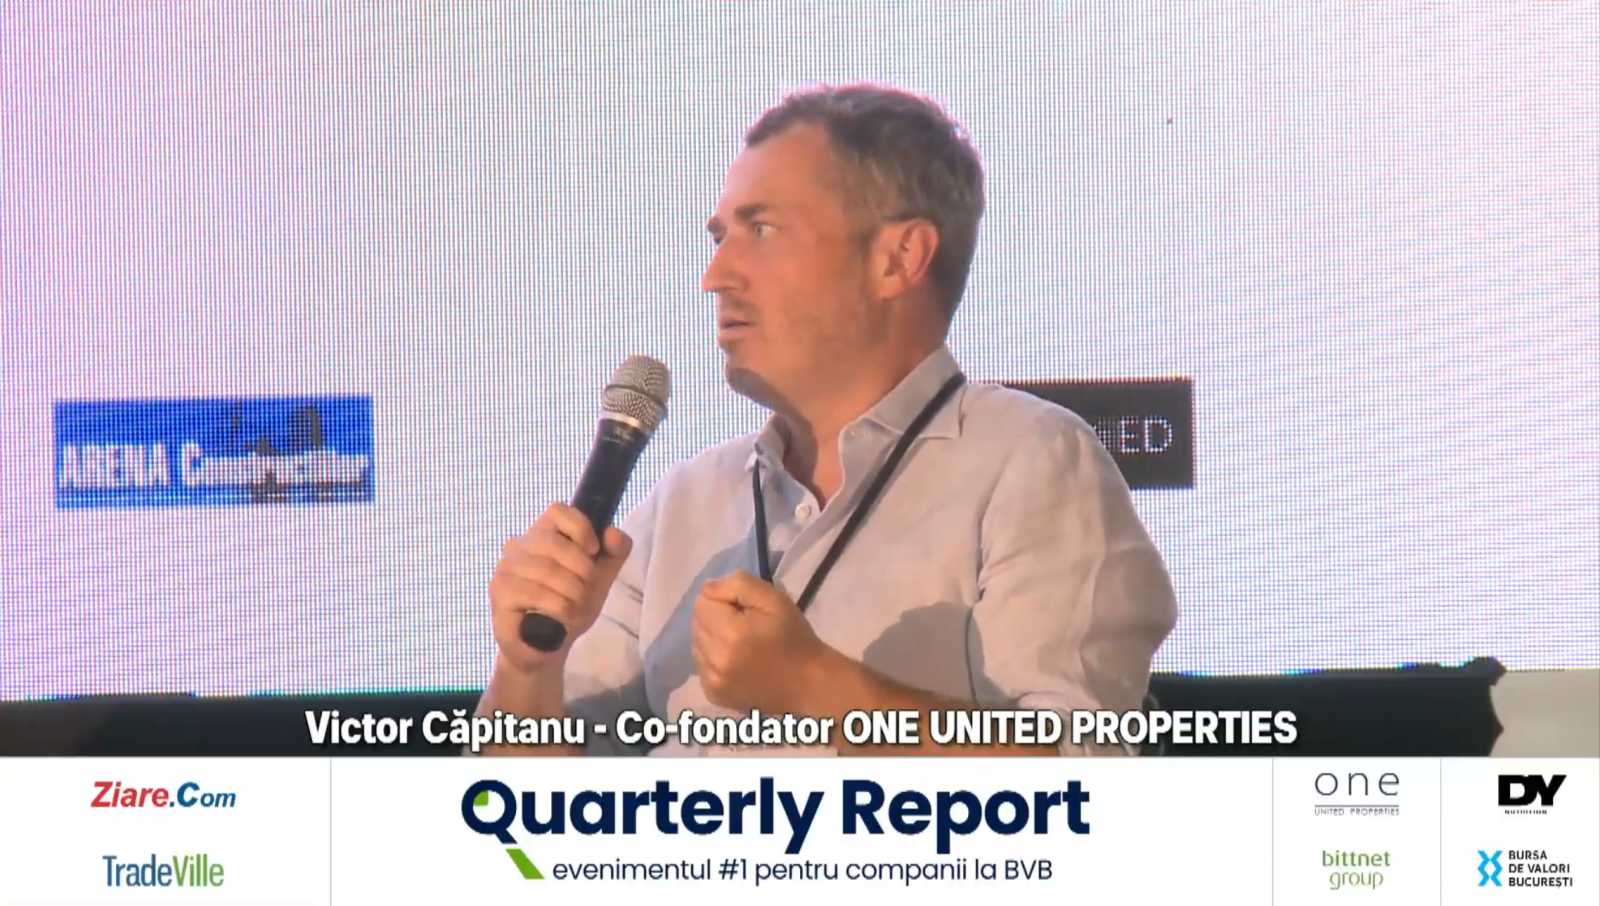 One United Properties at the Quarterly Report event - 1